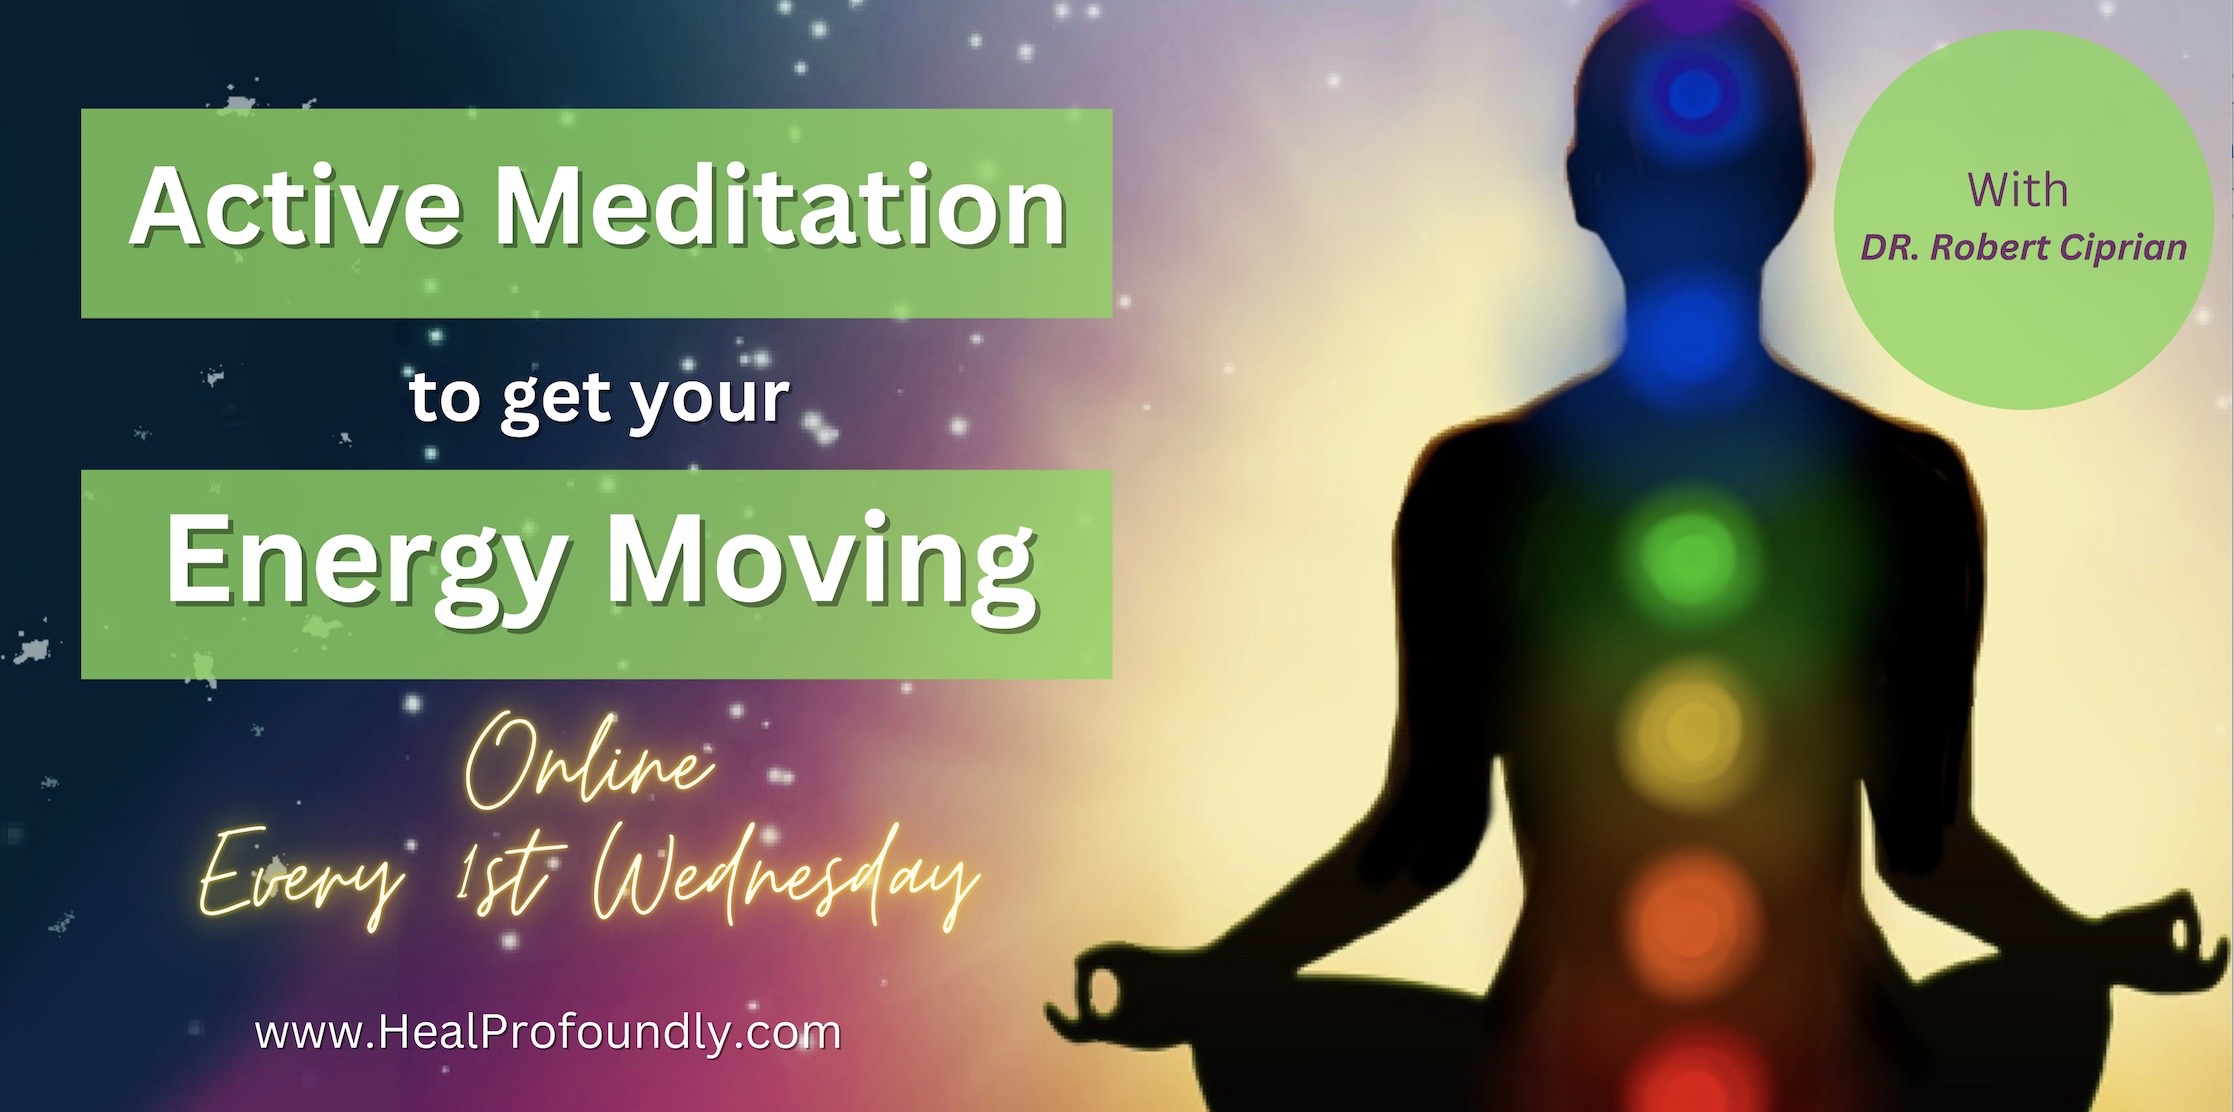 Active meditation to get your energy flowing